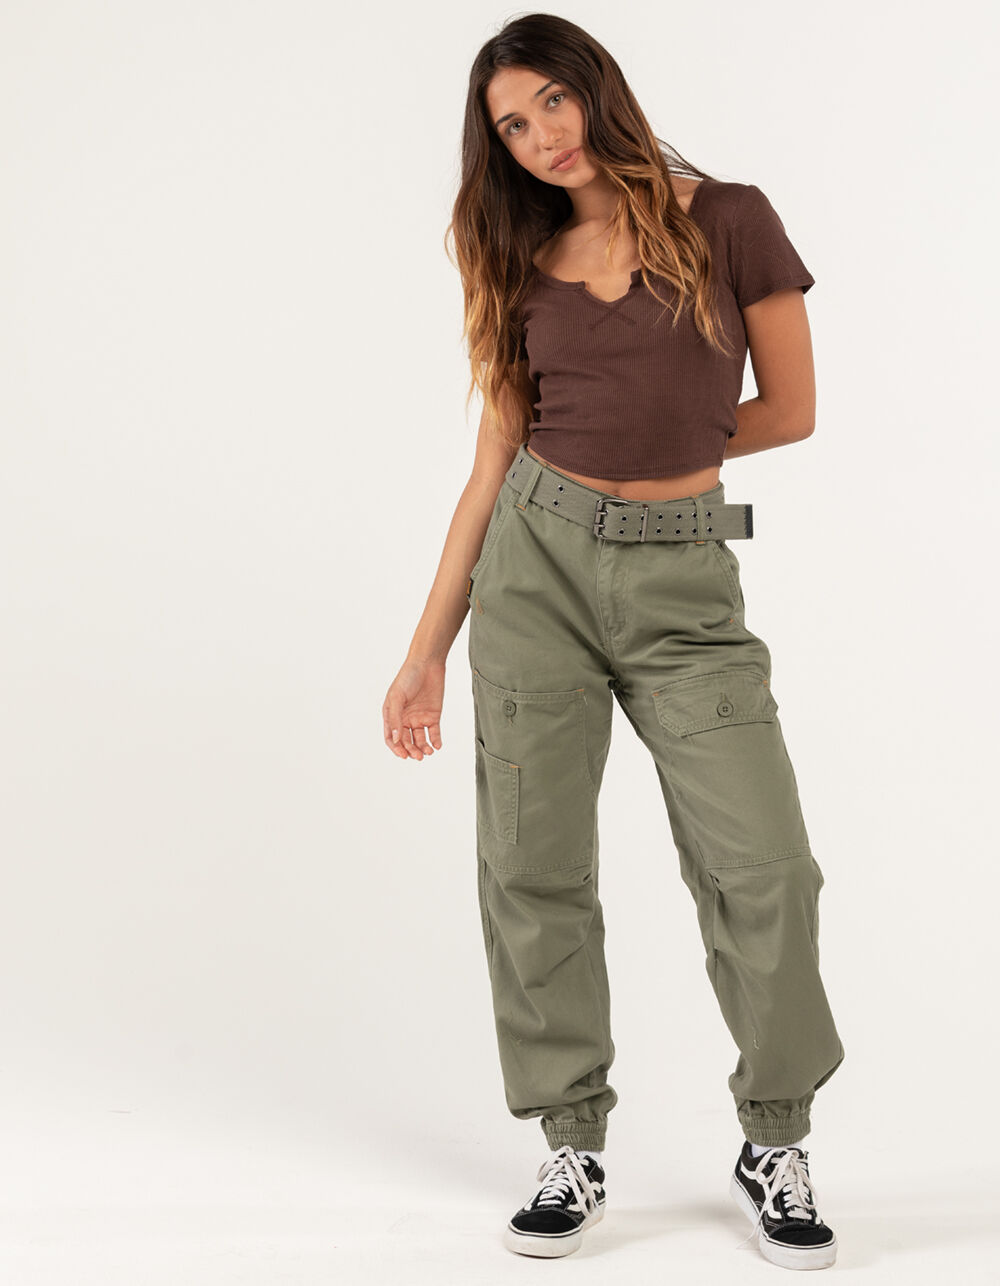 FIVESTAR GENERAL CO. Los Angeles Womens Cargo Jogger Pants - OLIVE